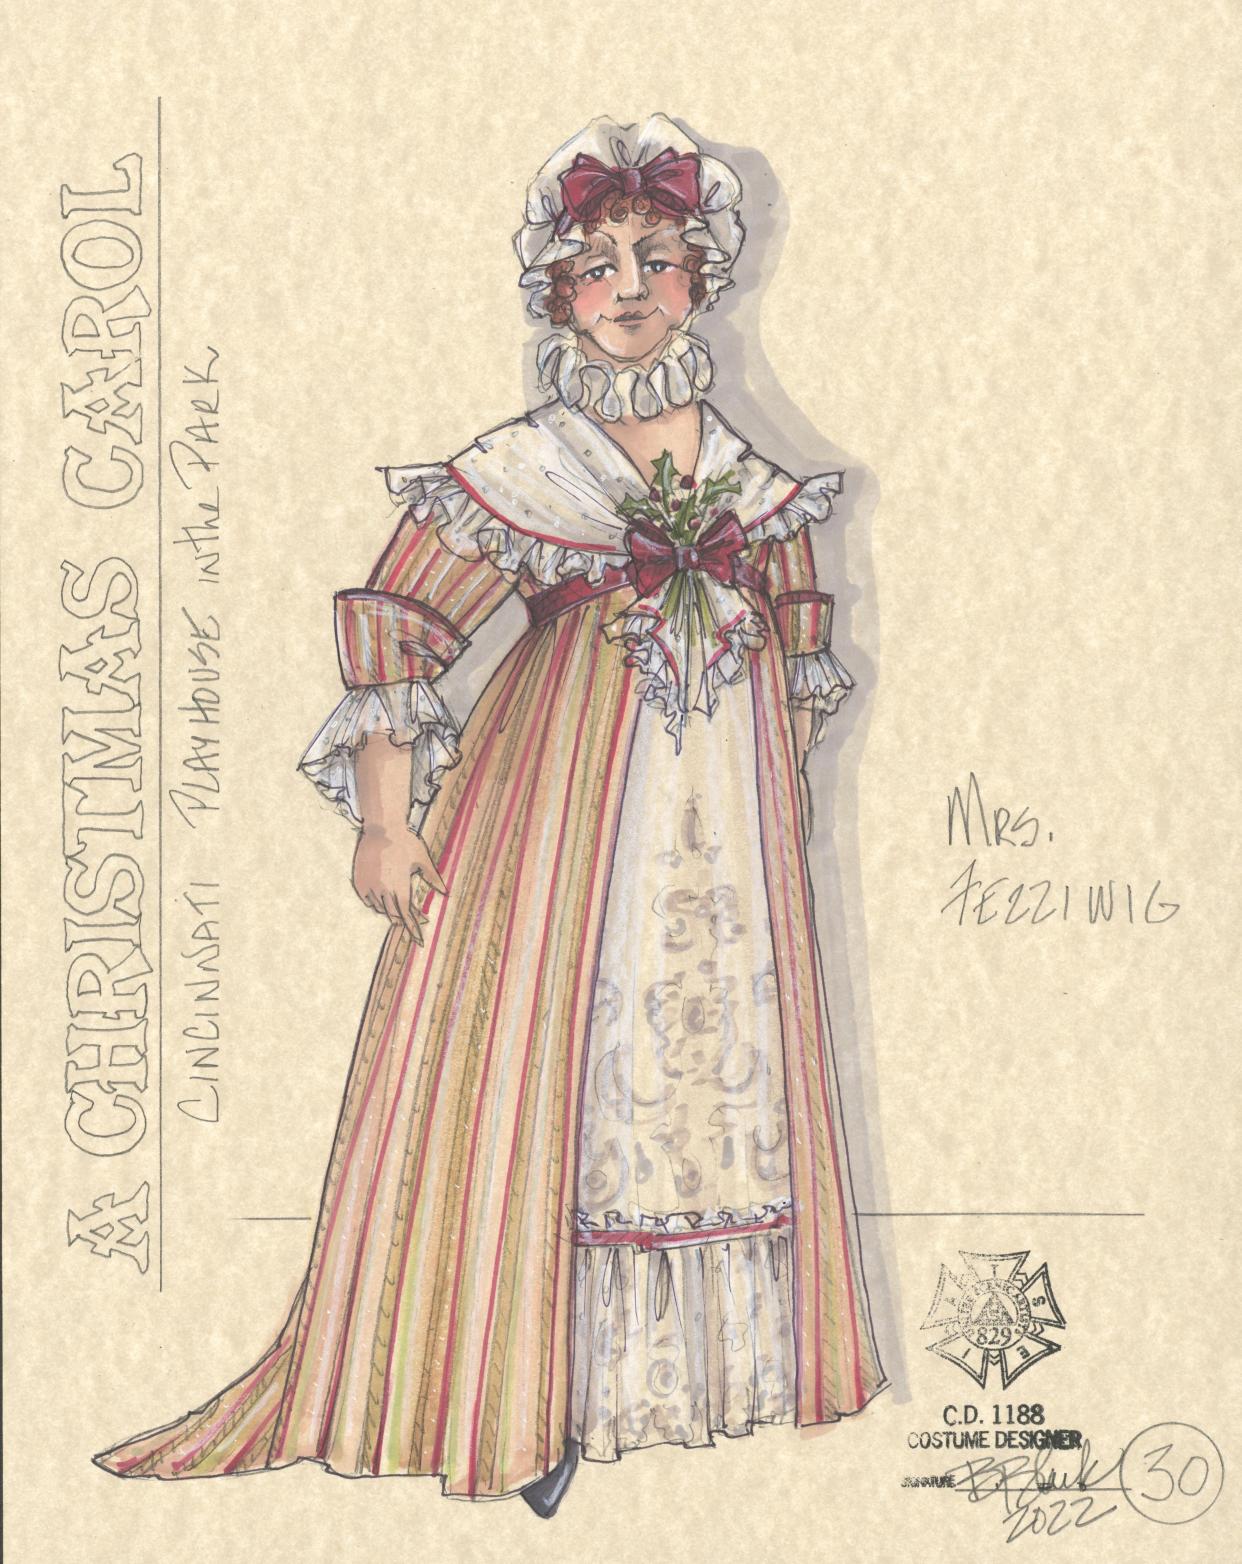 Designer Bill Black’s sketch of the costume to be worn by actor Burgess Byrd when she plays Mrs. Fezziwig in the Playhouse in the Park’s new adaptation of “A Christmas Carol.”